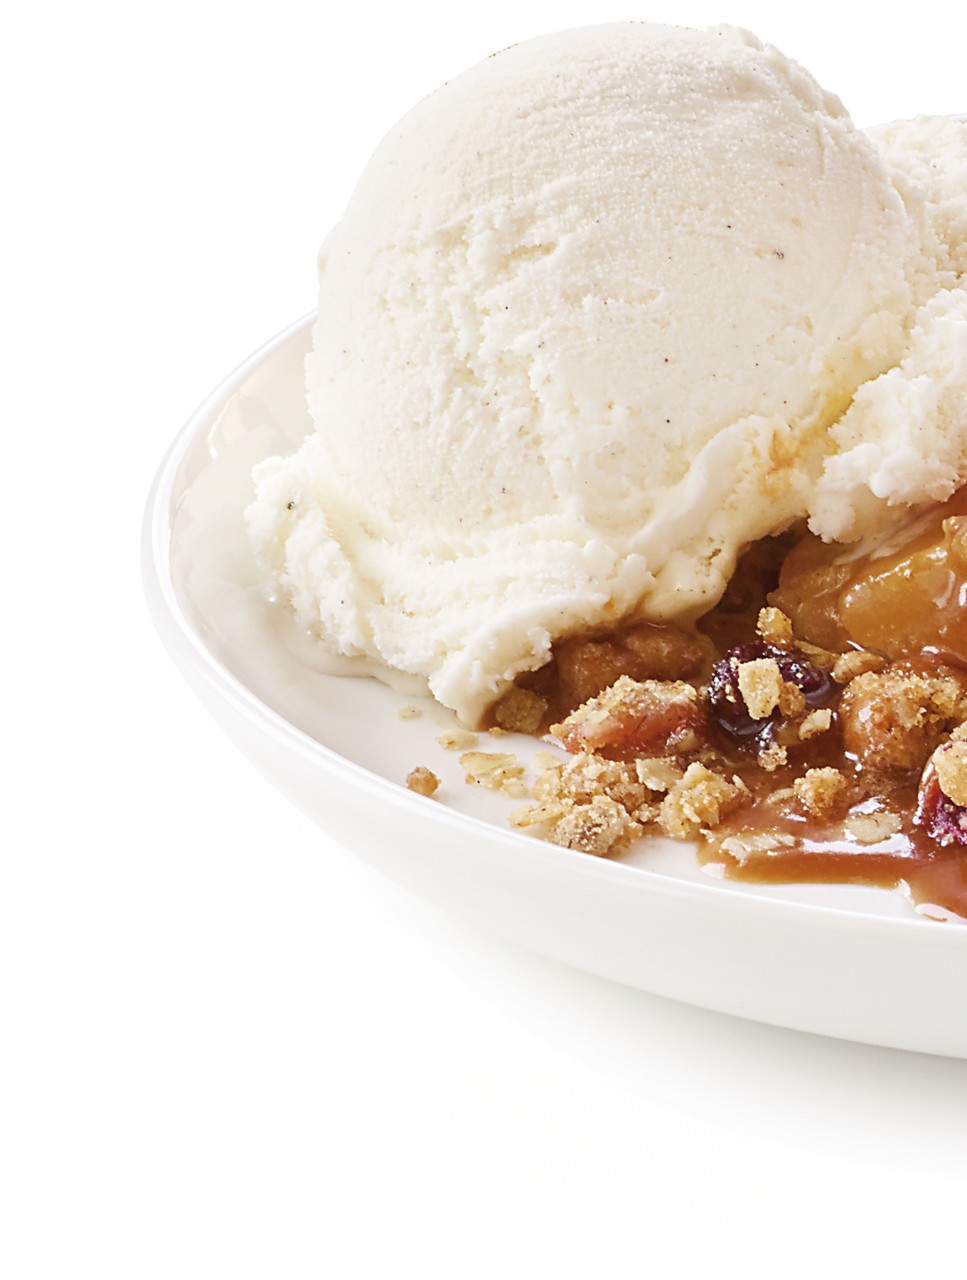 Apple-Cranberry Crisp with Warm Toffee Sauce